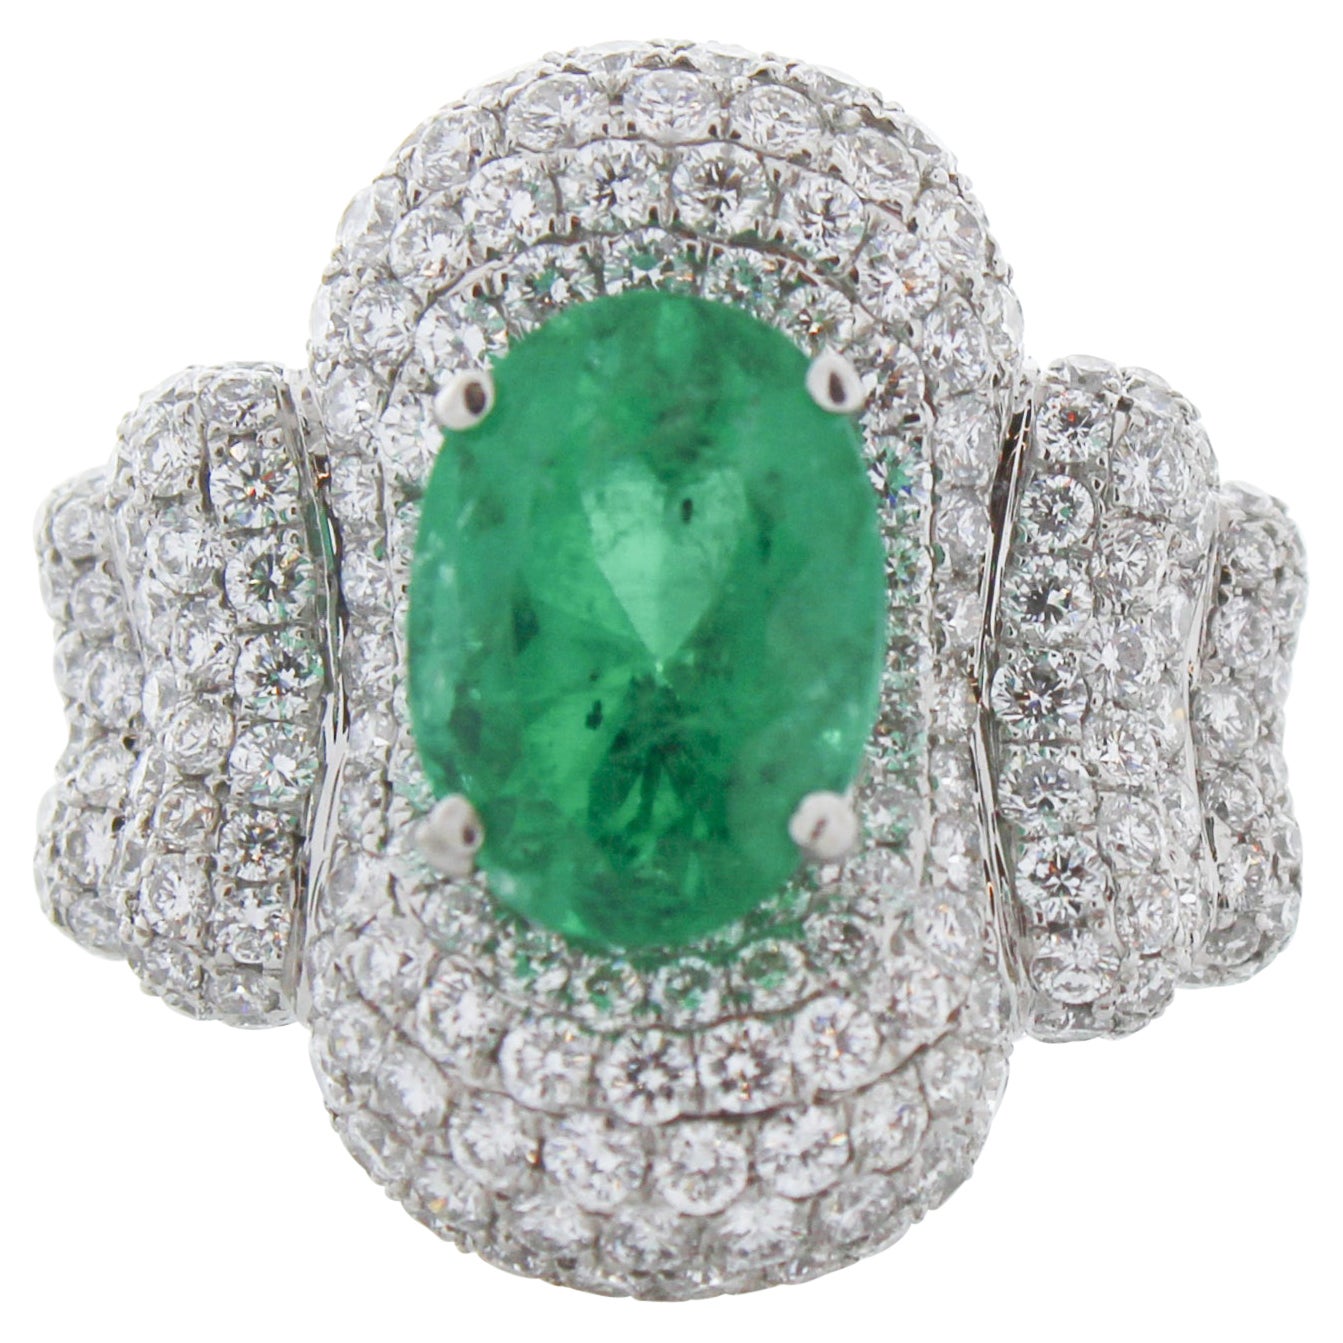 2.87 Carat Oval Emerald & Diamond Cocktail Ring in 18K White Gold